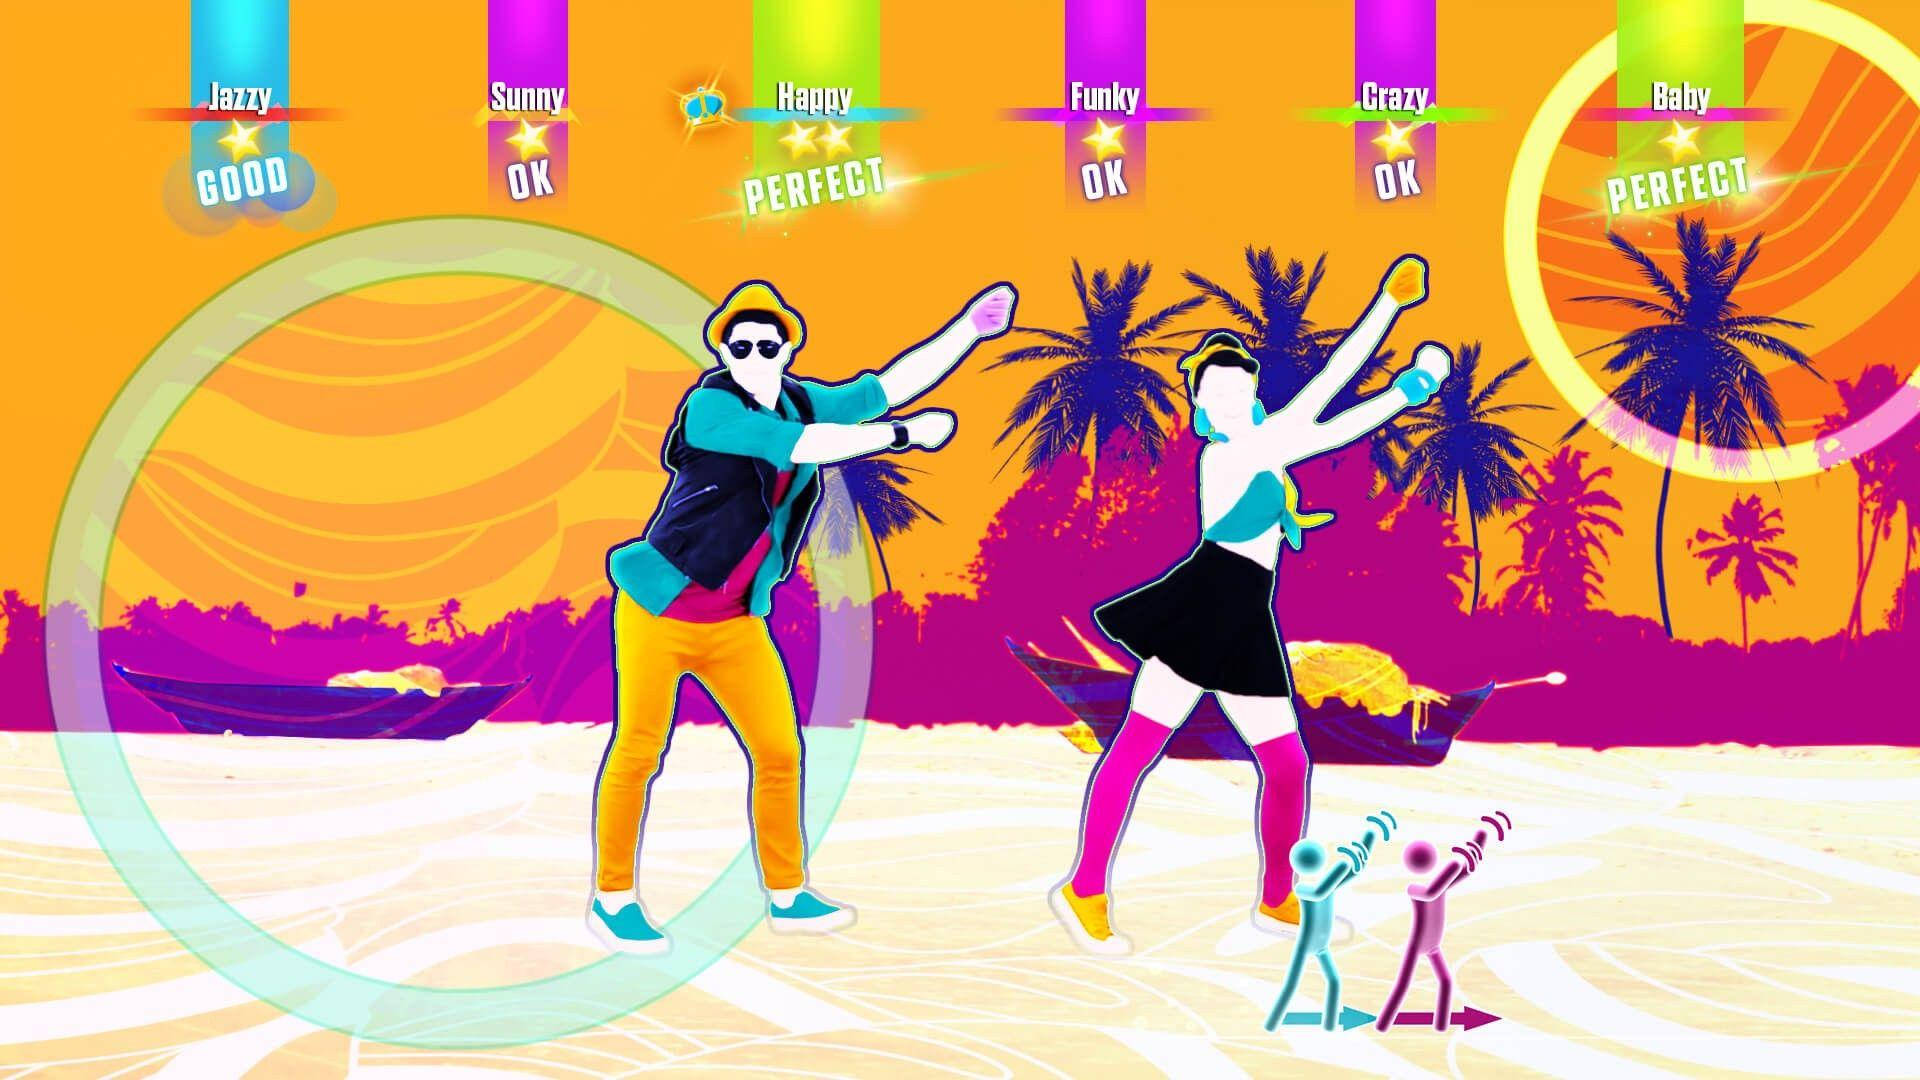 Just Dance 2017 Dancers On The Beach